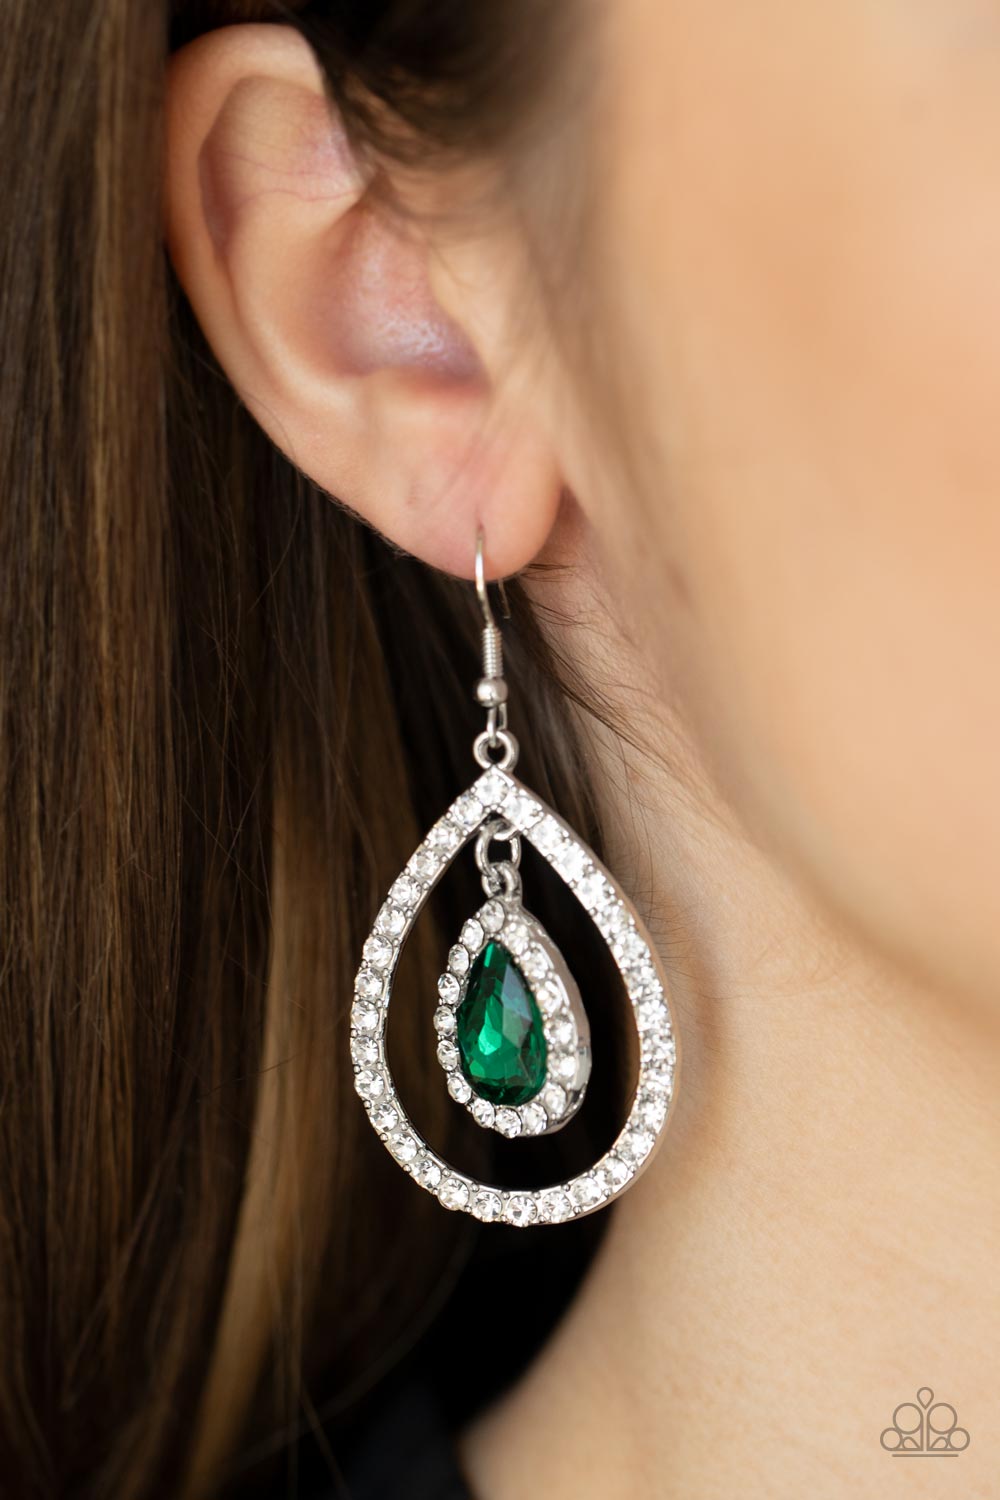 Blushing Bride Green &amp; White Rhinestone Earrings - Paparazzi Accessories-on model - CarasShop.com - $5 Jewelry by Cara Jewels